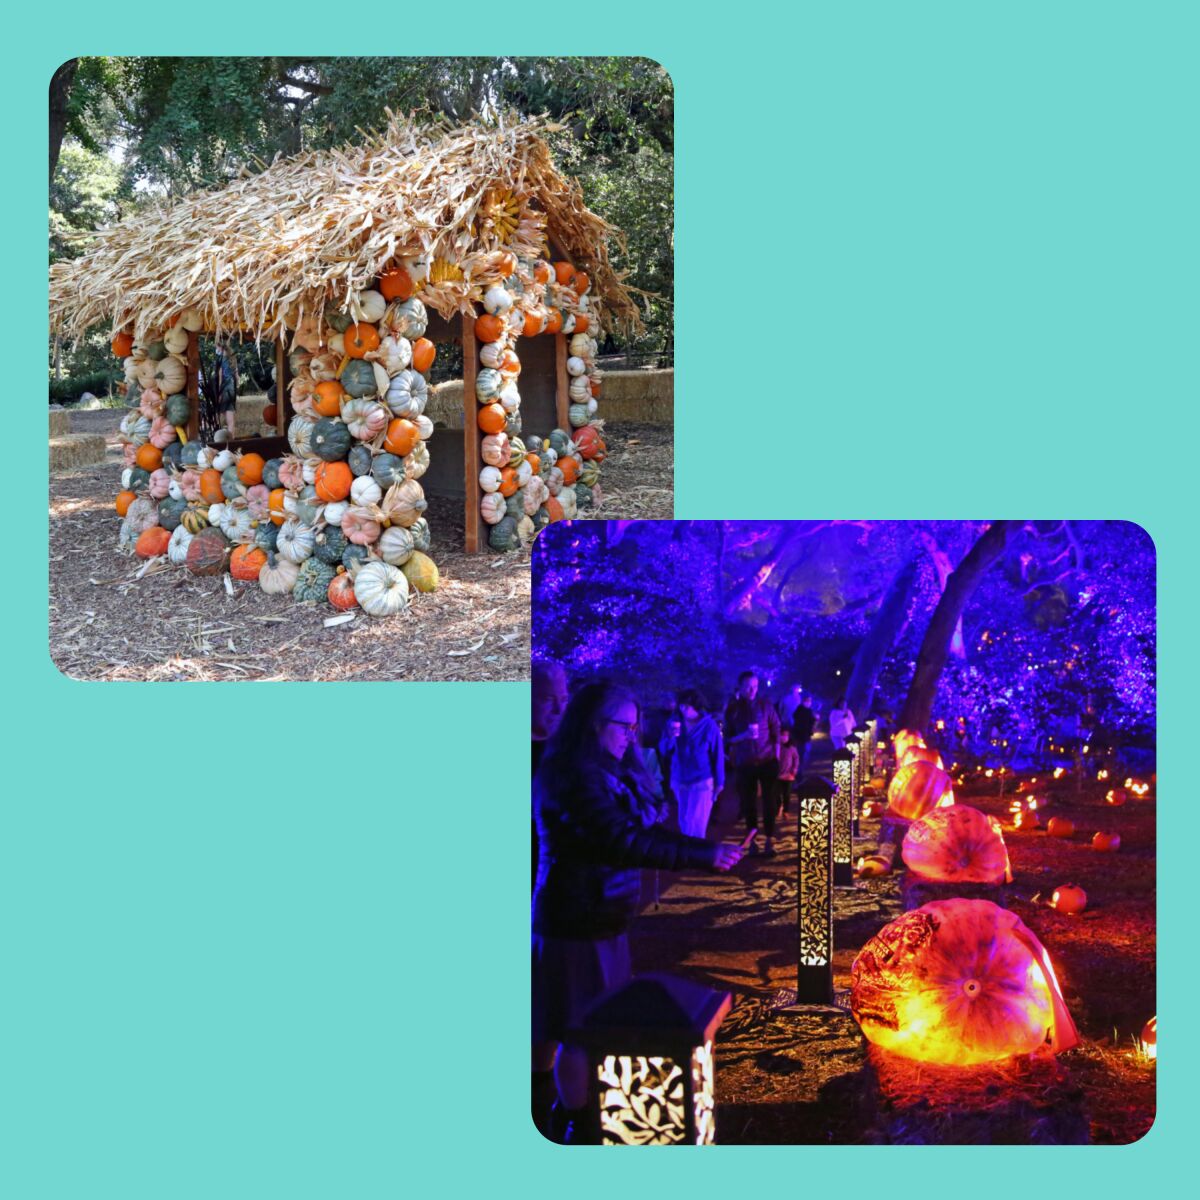 Photos of a hut decorated with pumpkins and of pumpkin lights on a light-blue background